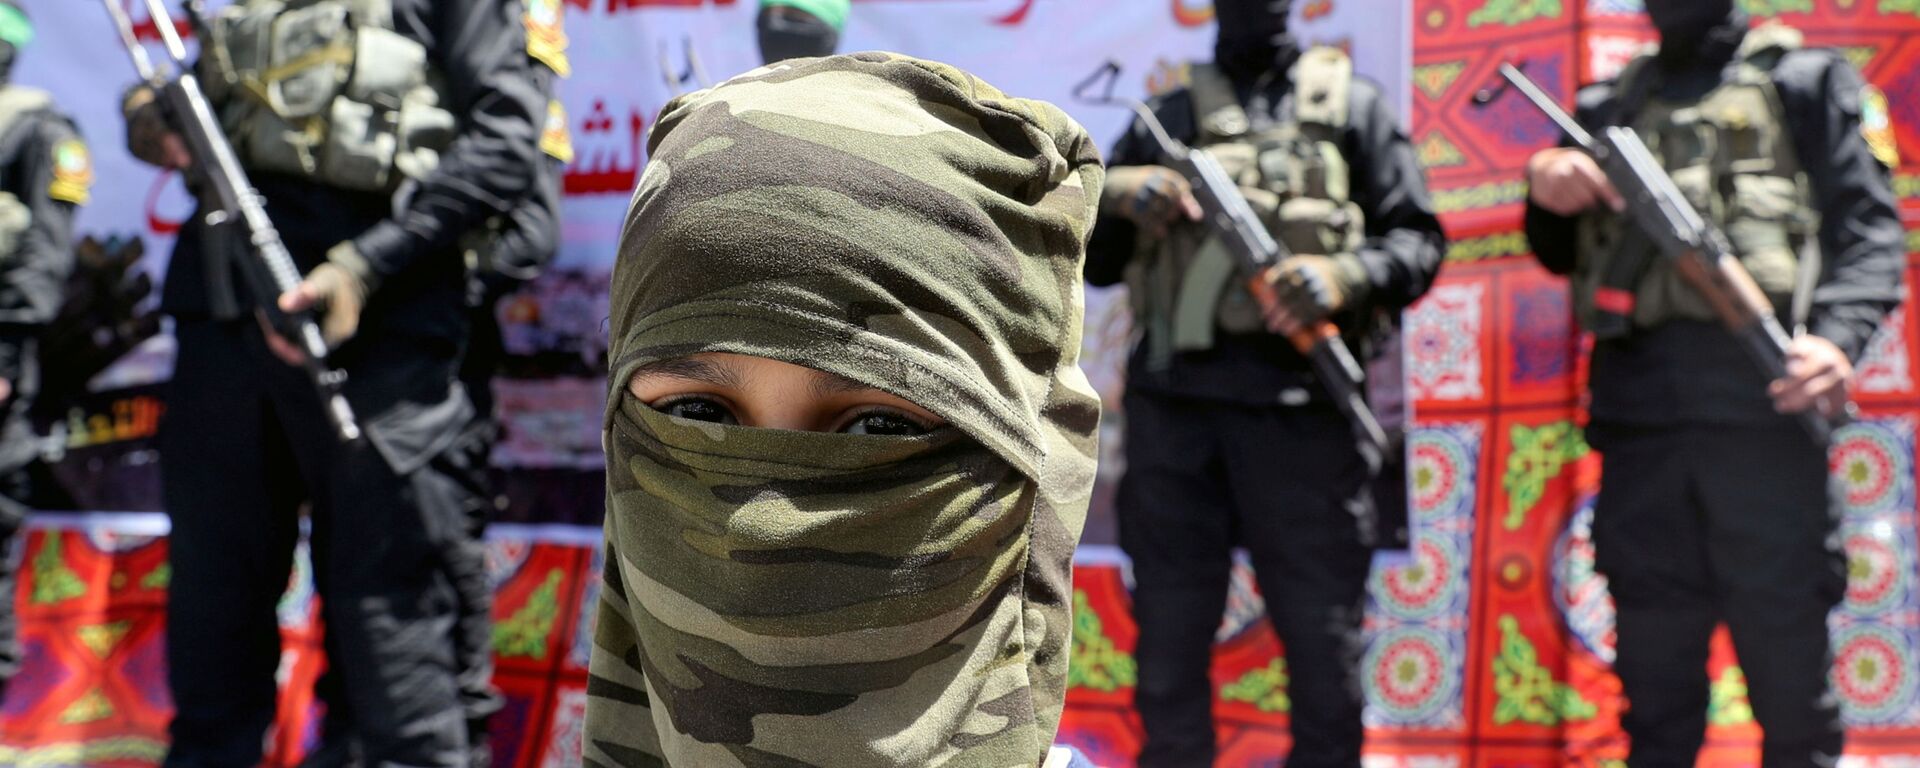 A masked Palestinian boy looks on as Hamas militant take part in a protest over the possible eviction of several Palestinian families from homes on land claimed by Jewish settlers in the Jerusalem's Sheikh Jarrah neighbourhood, in the northern Gaza Strip on May 7, 2021. - Sputnik International, 1920, 16.05.2021